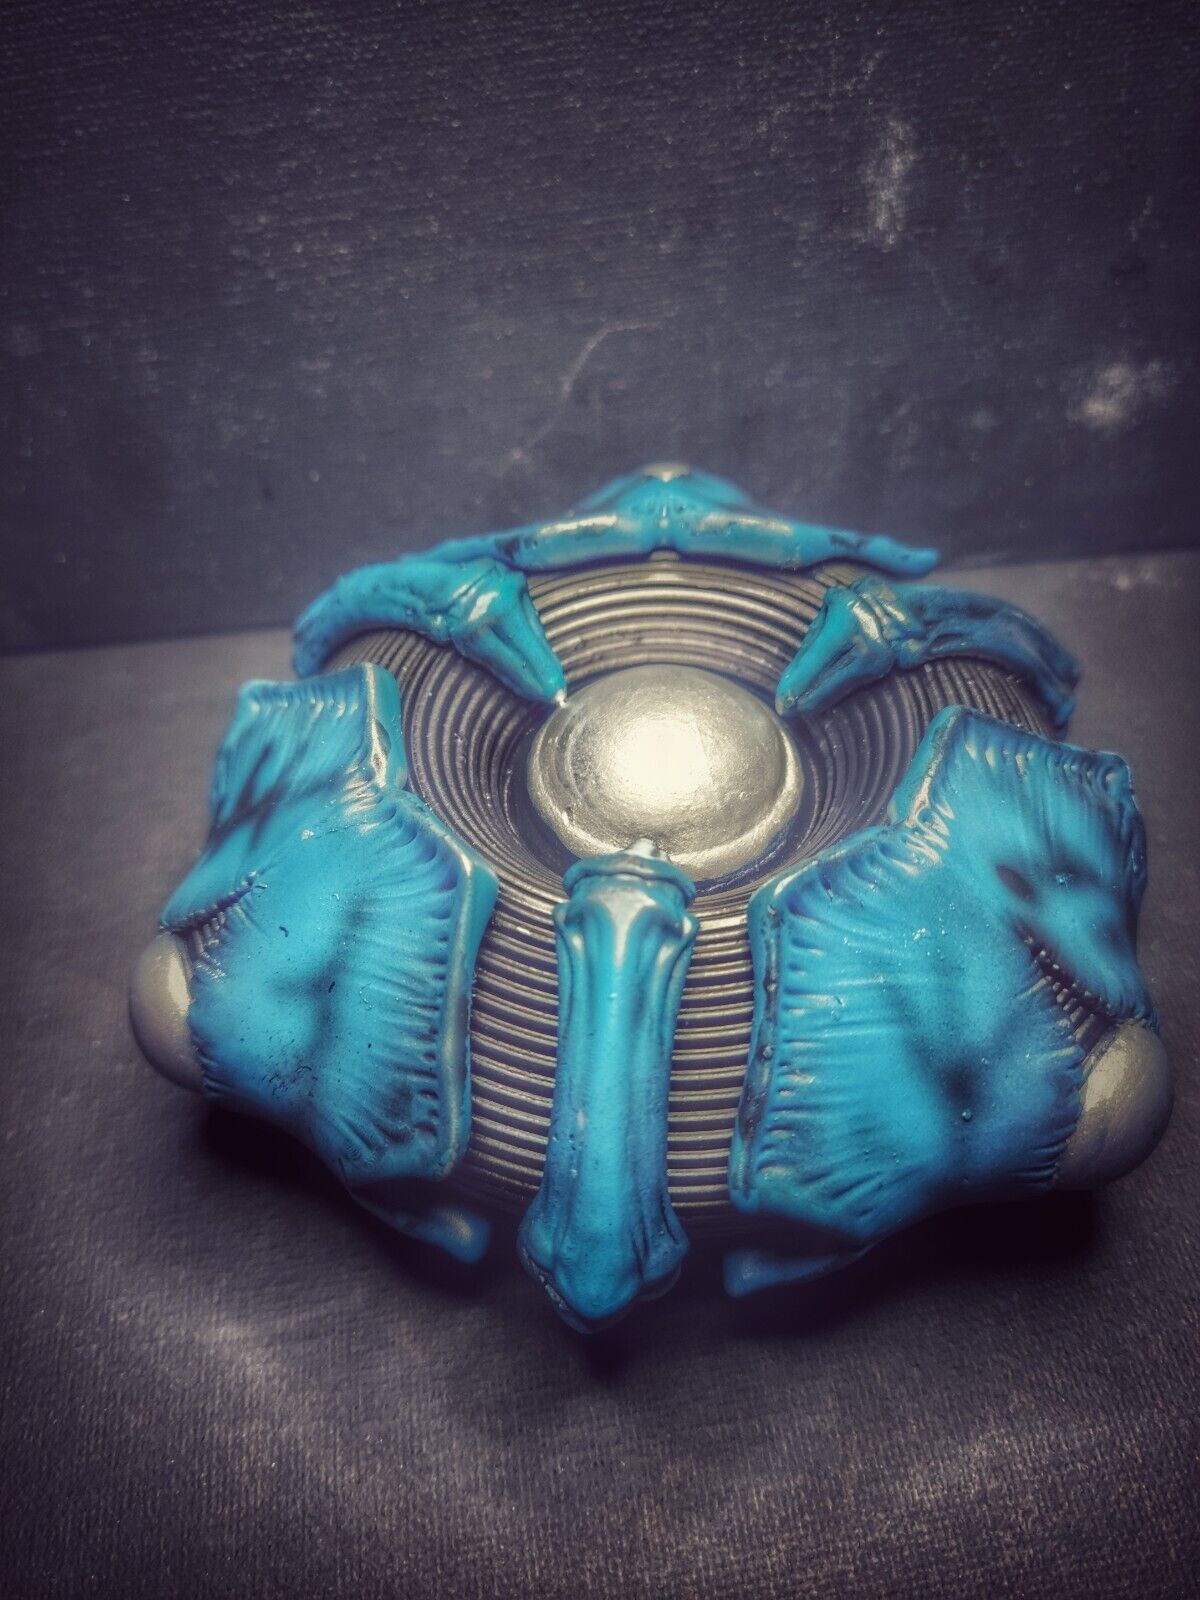 Guyver Unit replica resin printed. Comes Fully Painted With Your Choice Of Color